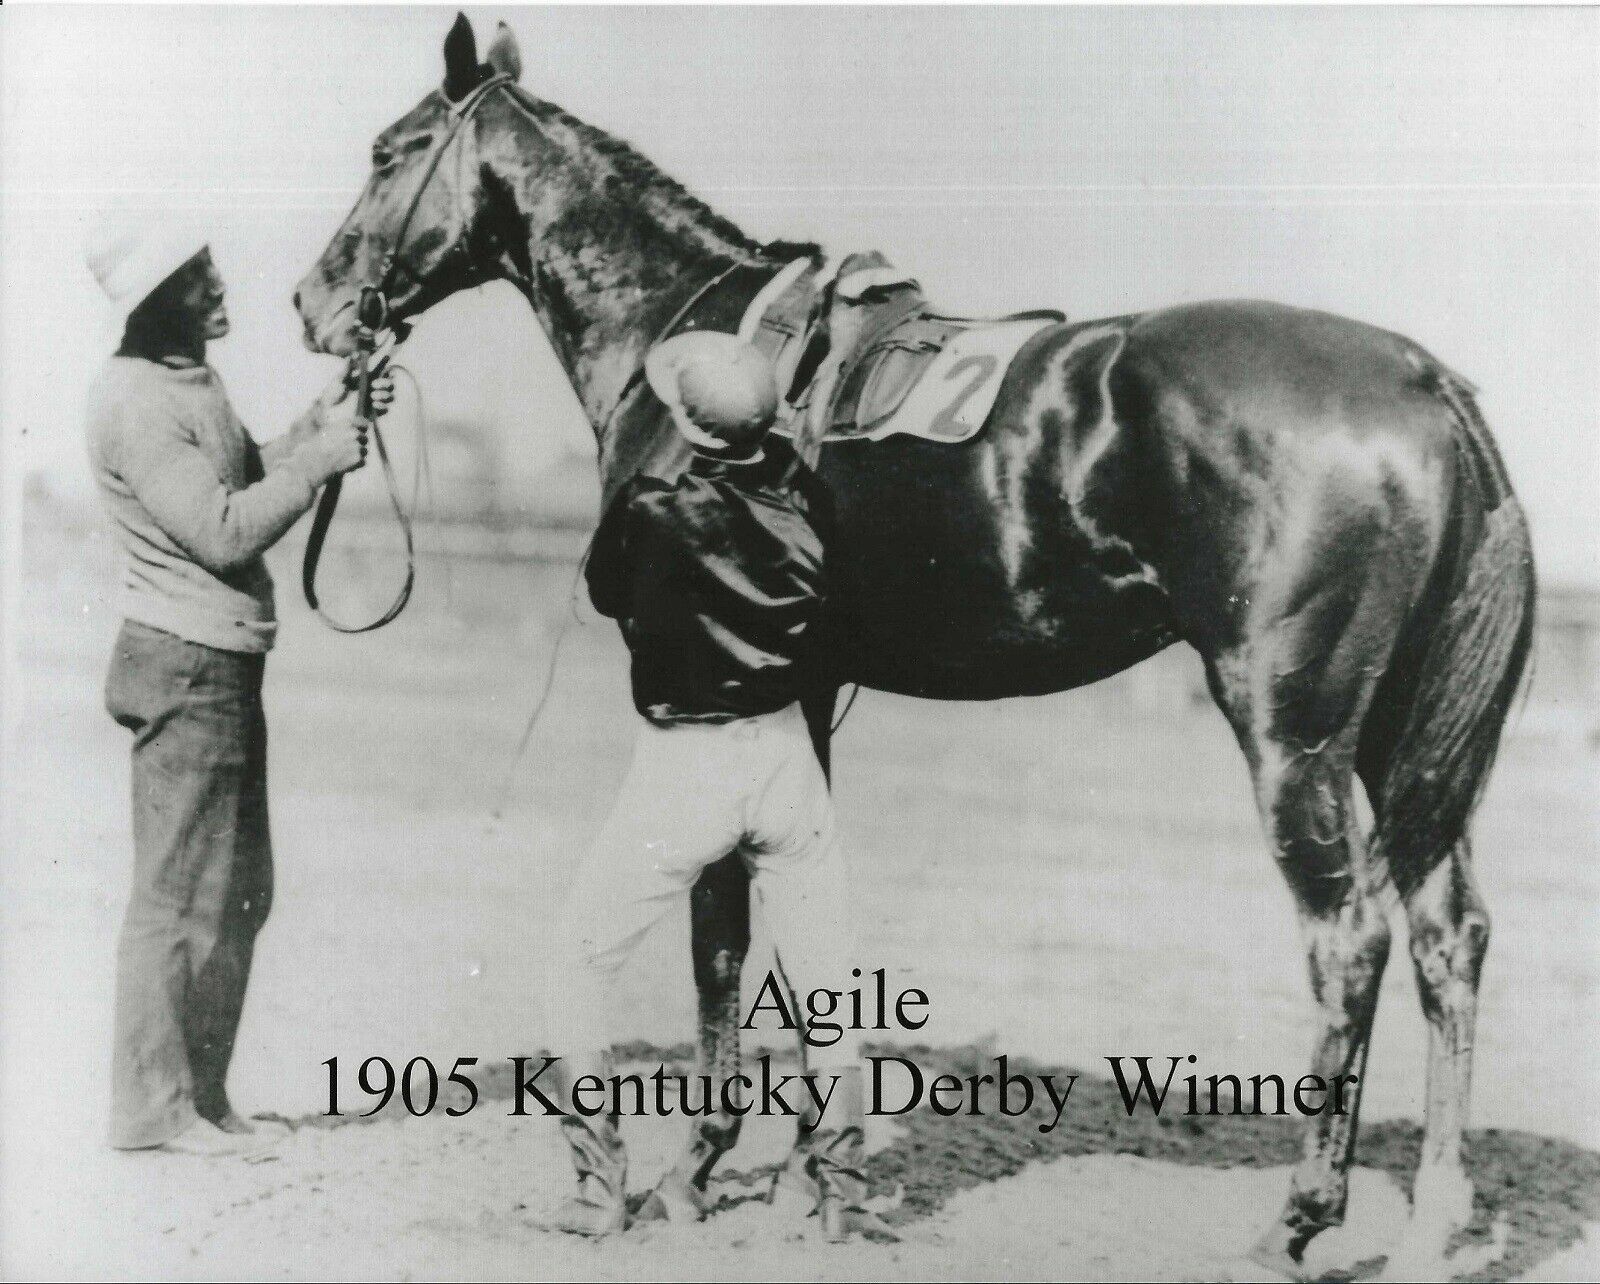 Primary image for 1905 - AGILE after winning the Kentucky Derby - 10" x 8"